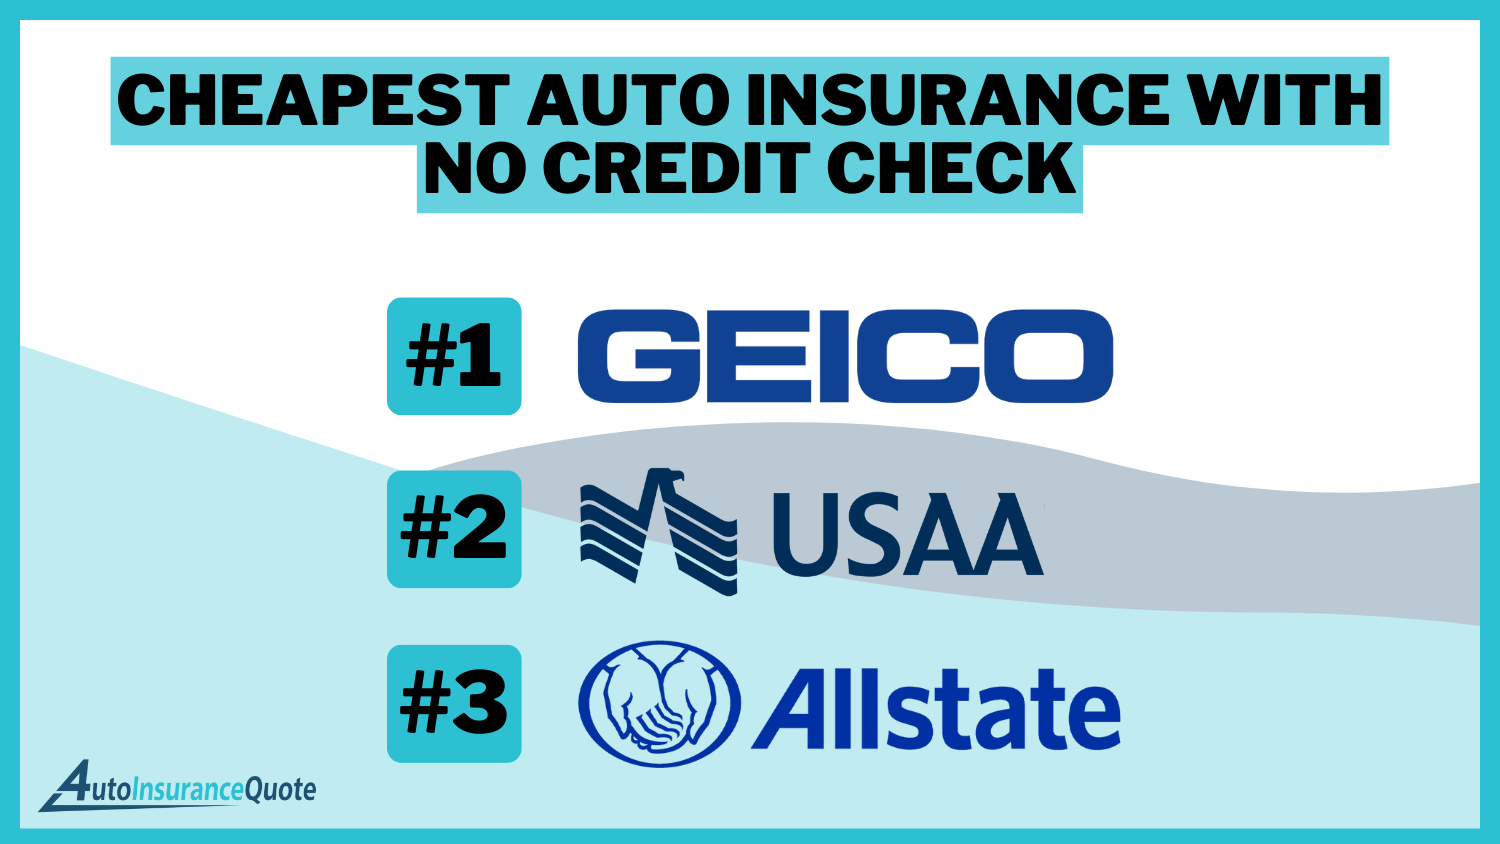 Cheapest Auto Insurance With No Credit Check: Geico, USAA, and Allstate